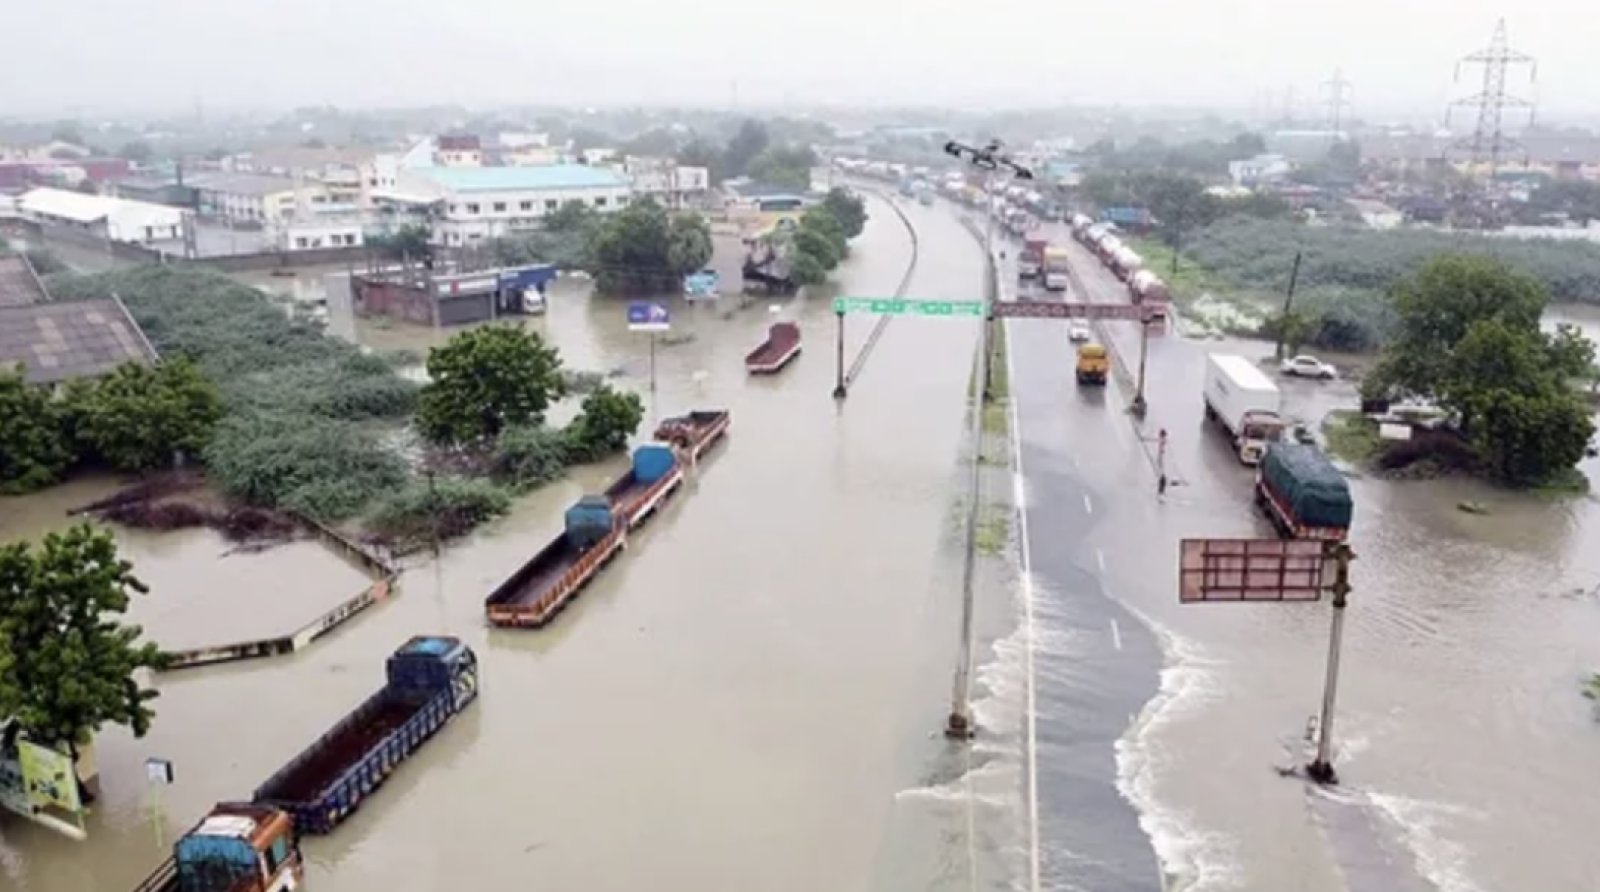 Heavy rains wreak havoc in Tamil Nadu, 10 people died; 17 thousand people forced to live in relief camps